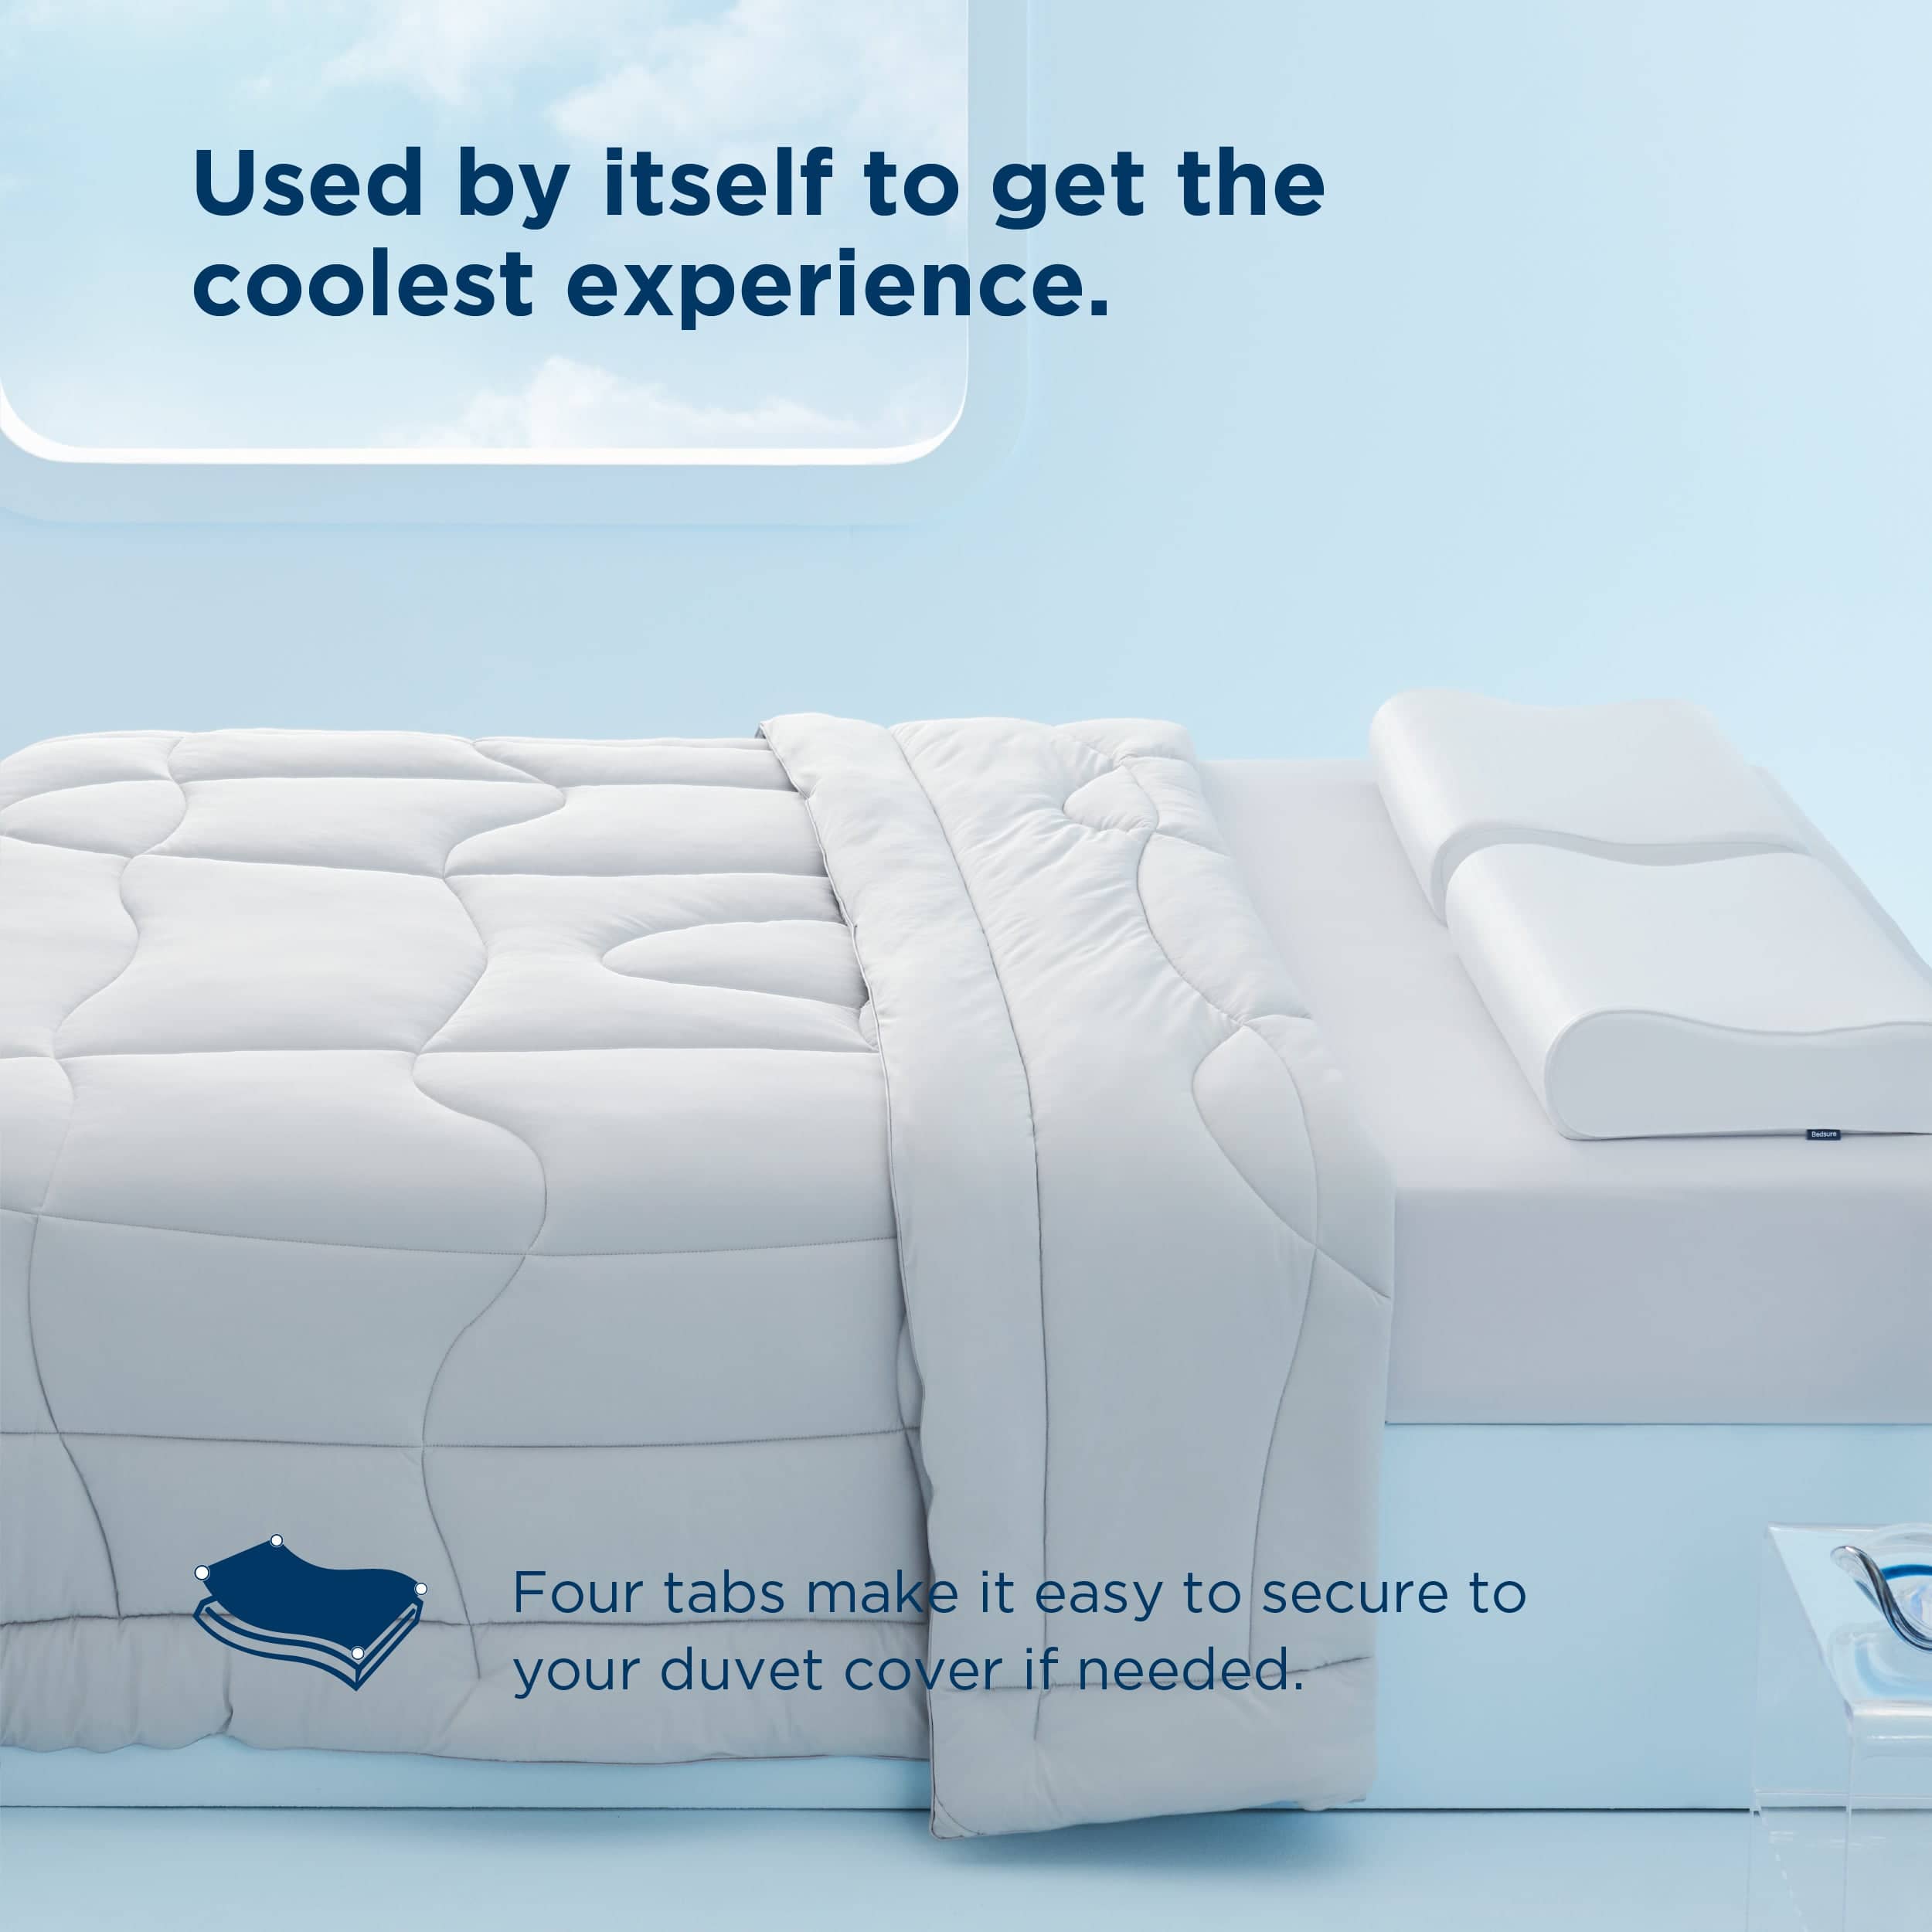 Bedsure Breescape Cooling Comforter for Hot Sleepers Q-Max>0.4